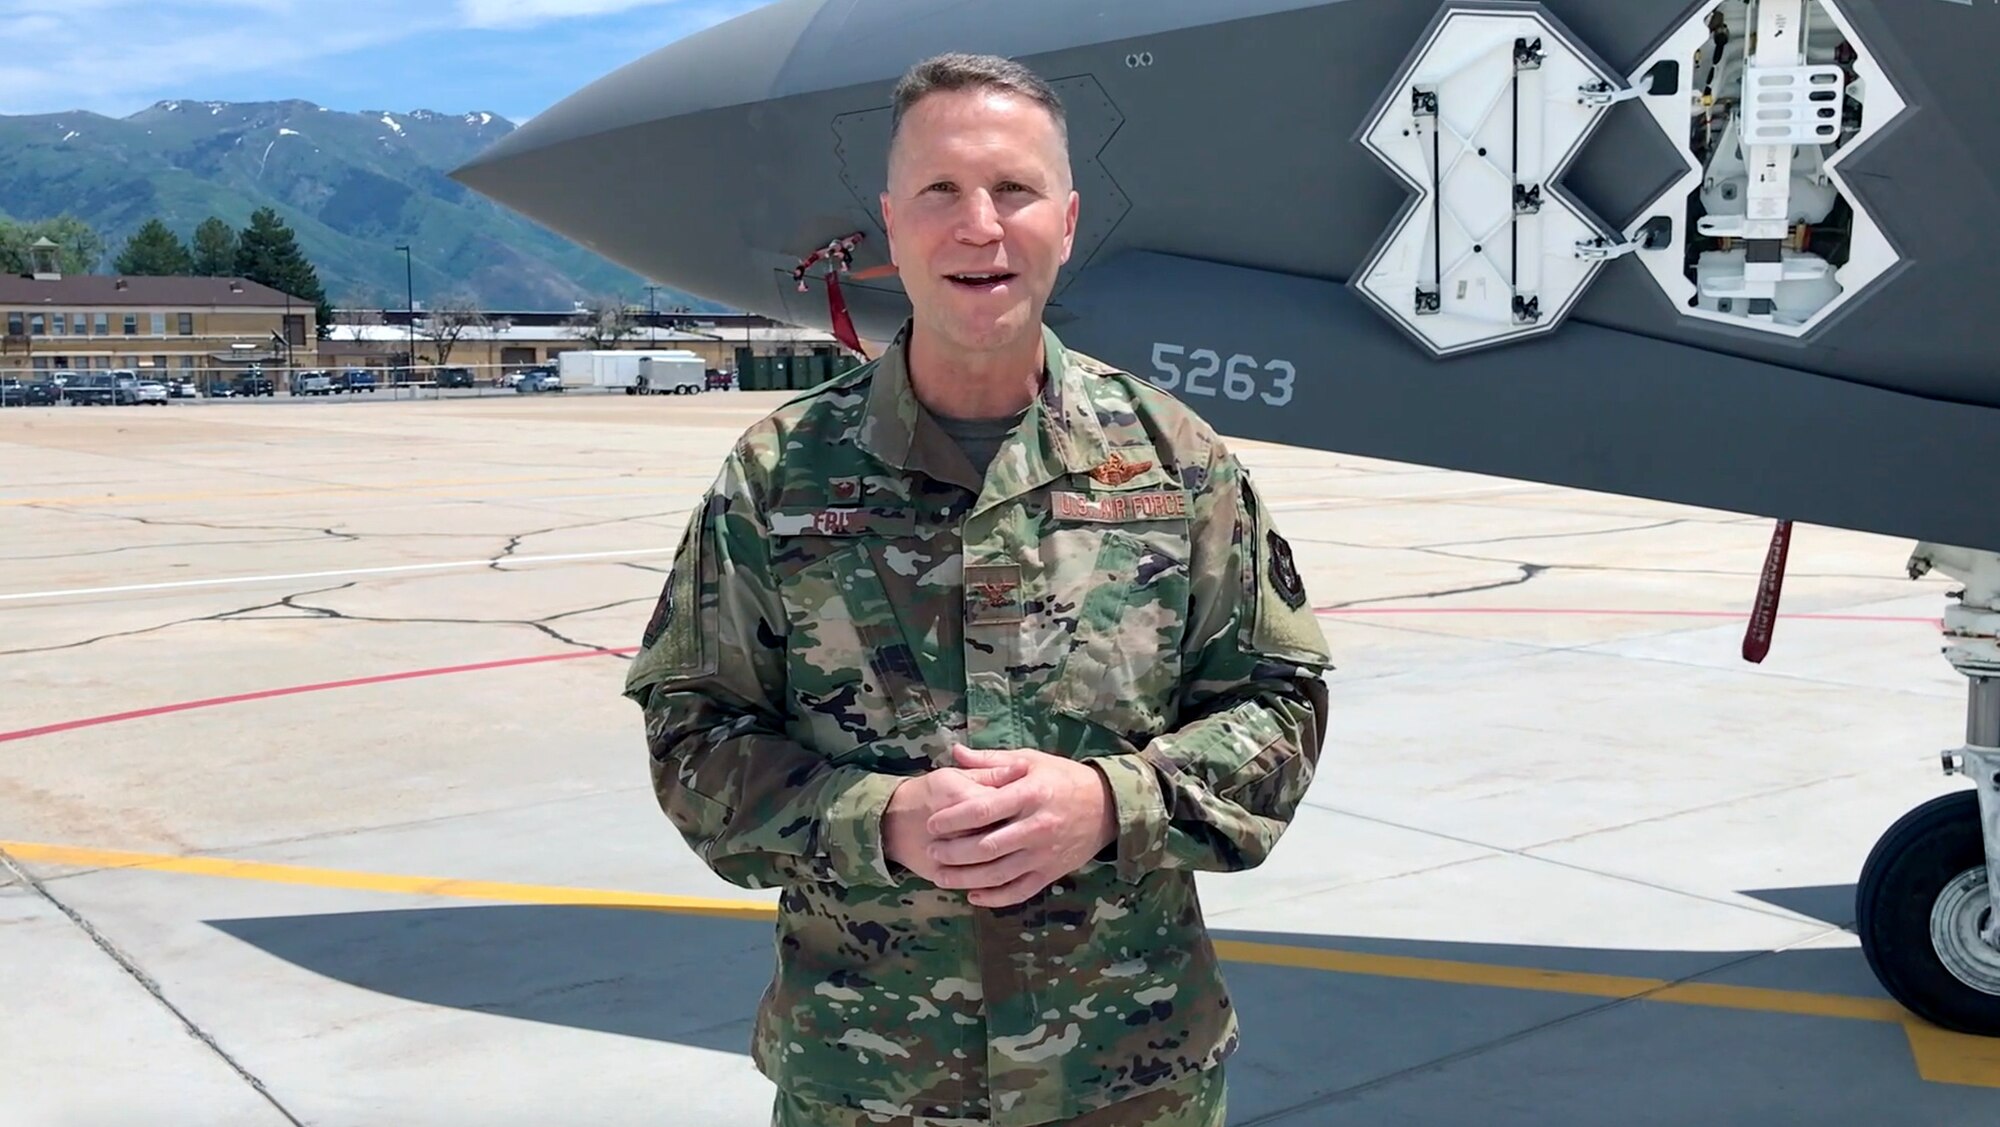 Due to COVID-19 restrictions on mass gatherings, the new 419th Fighter Wing commander, Col. Matthew "Eddie" Fritz, addresses wing personnel via video from the Hill Air Force Base flightline